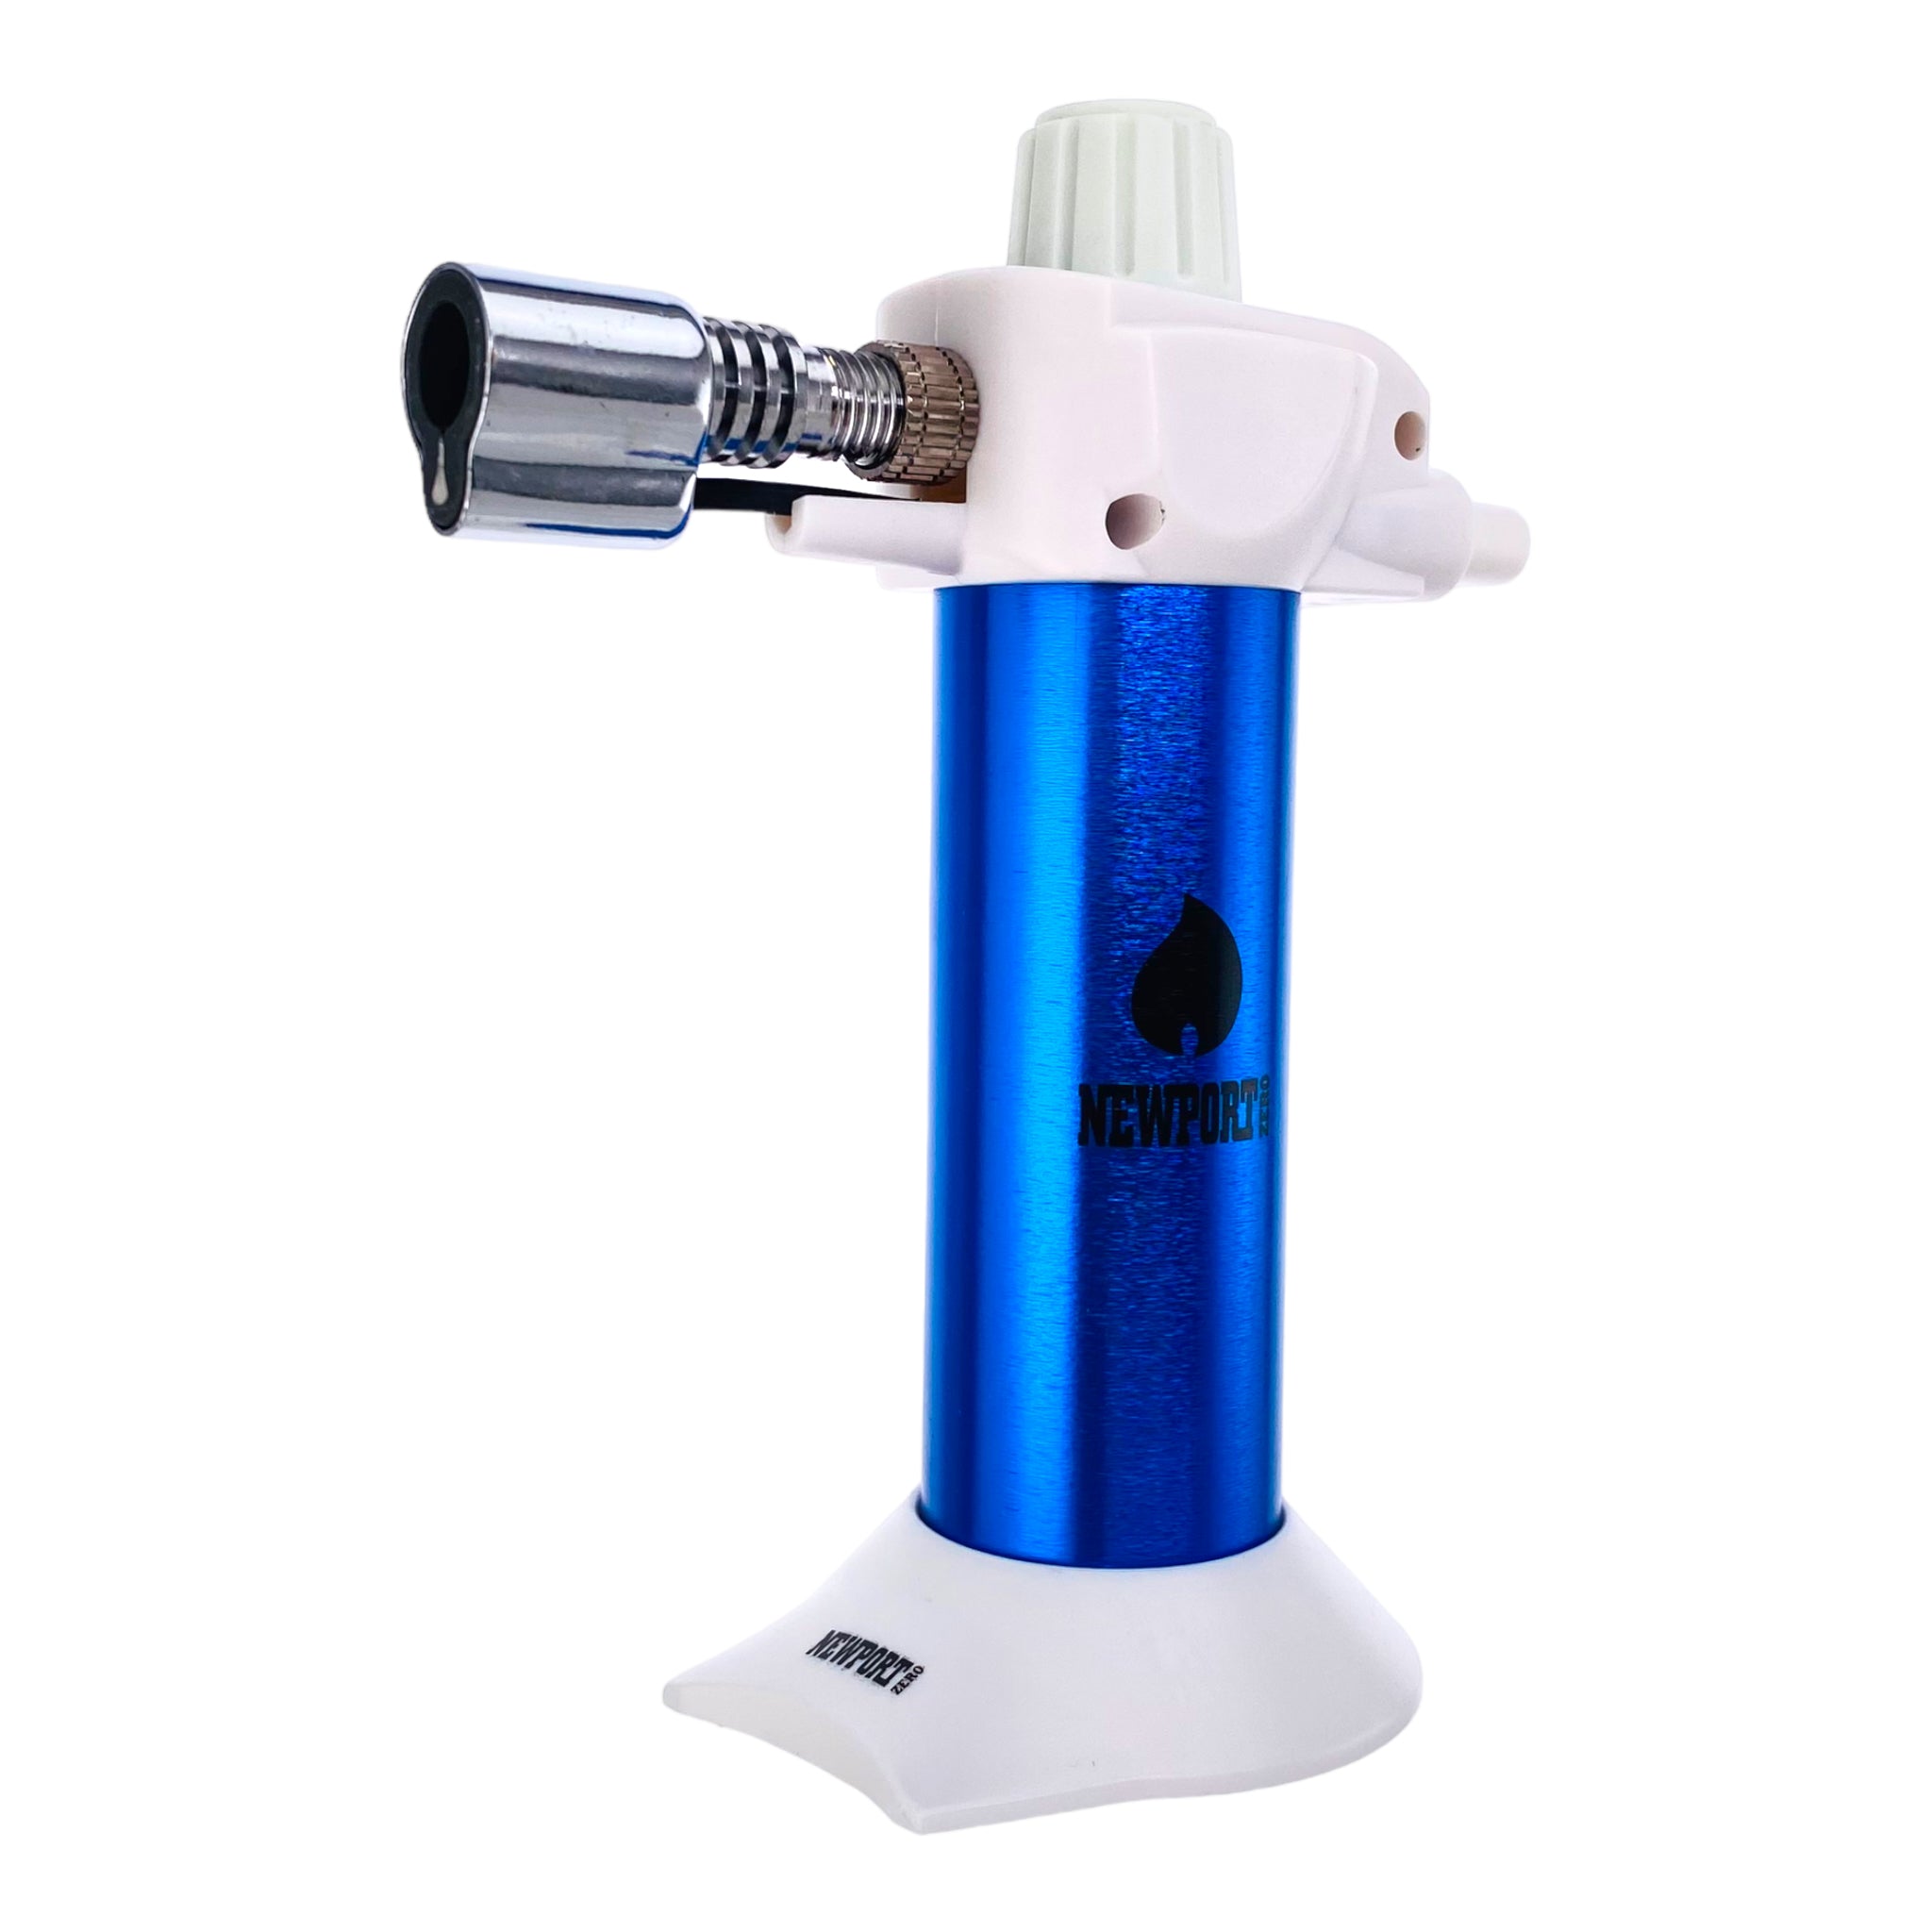 Newport Torch - Mini 5.5" Torch - Blue best cute durable and relaiable dabbing torch